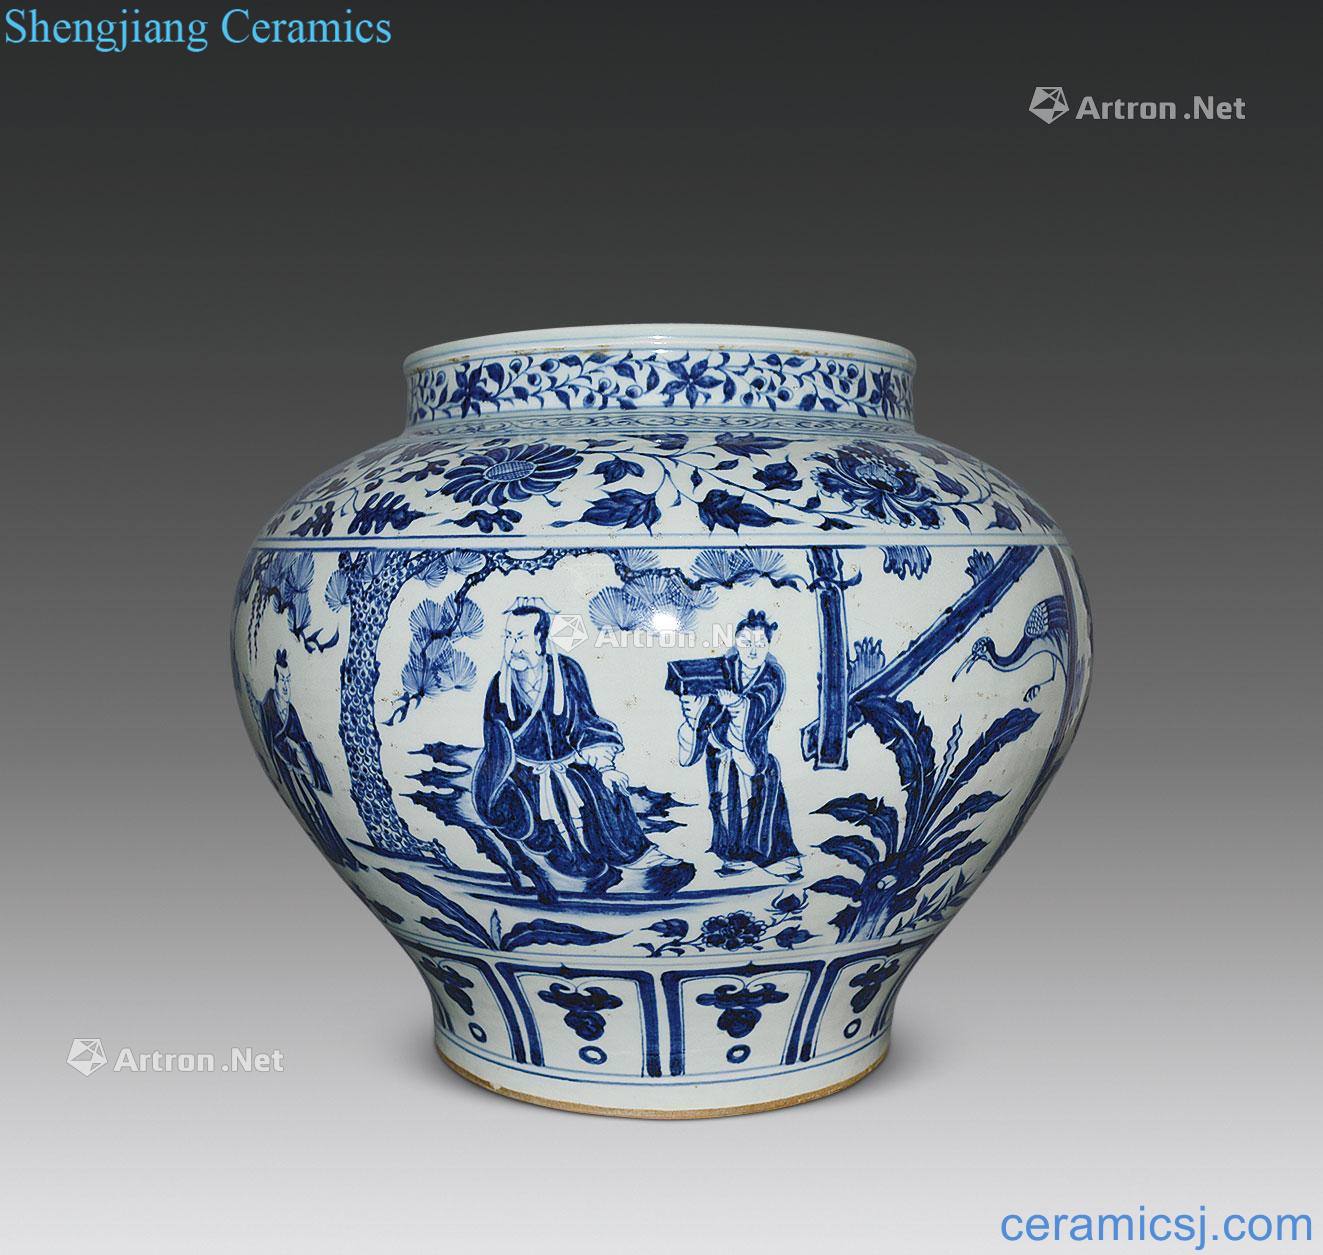 Stories of the yuan dynasty blue and white "sincerity" cans